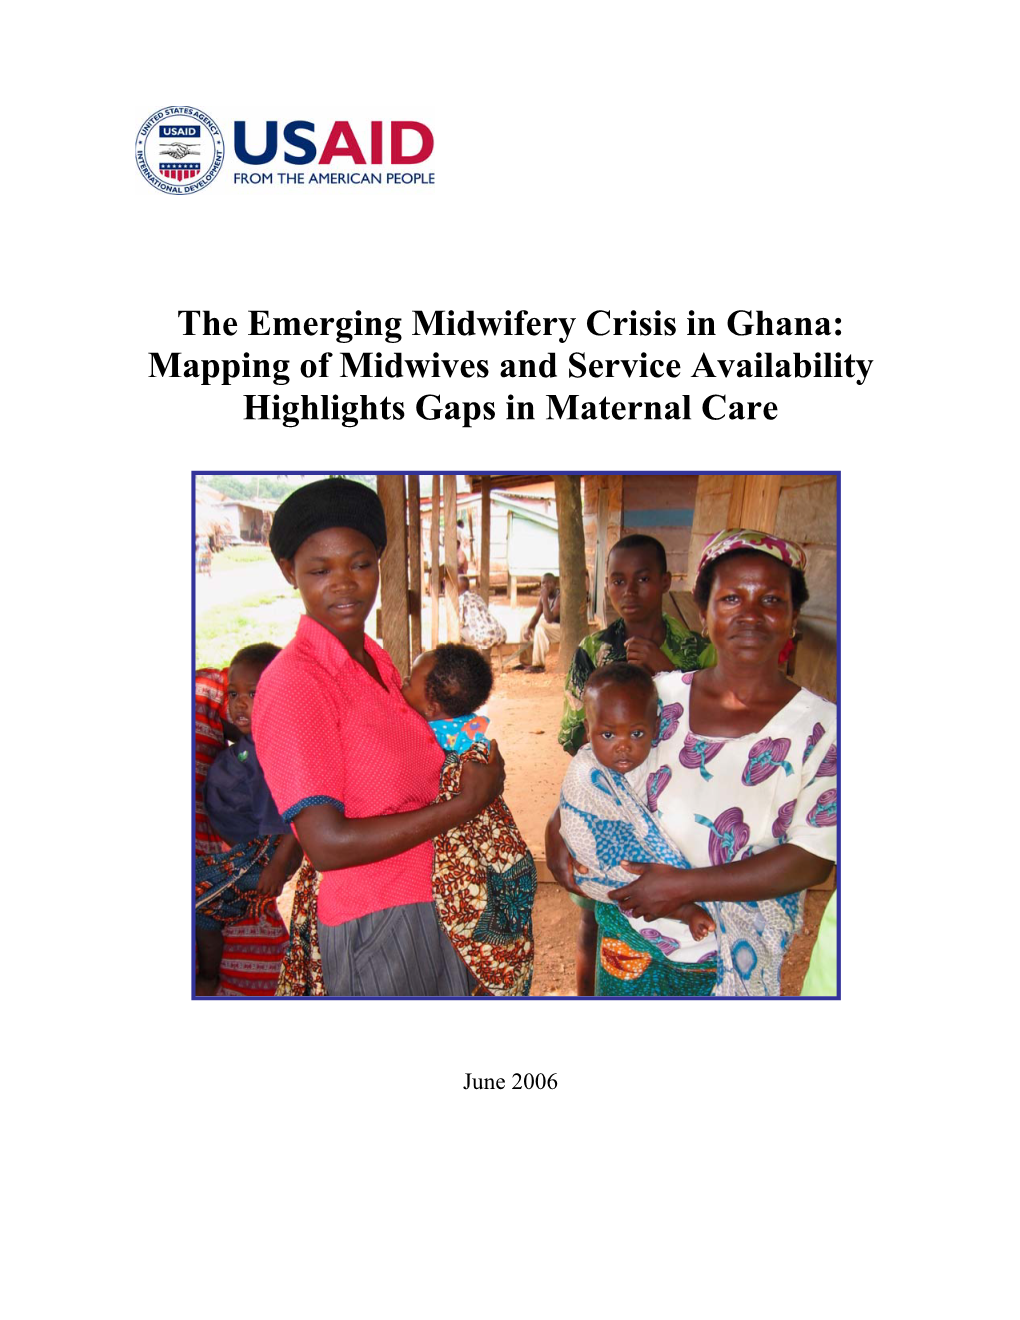 The Emerging Midwifery Crisis in Ghana: Mapping of Midwives and Service Availability Highlights Gaps in Maternal Care